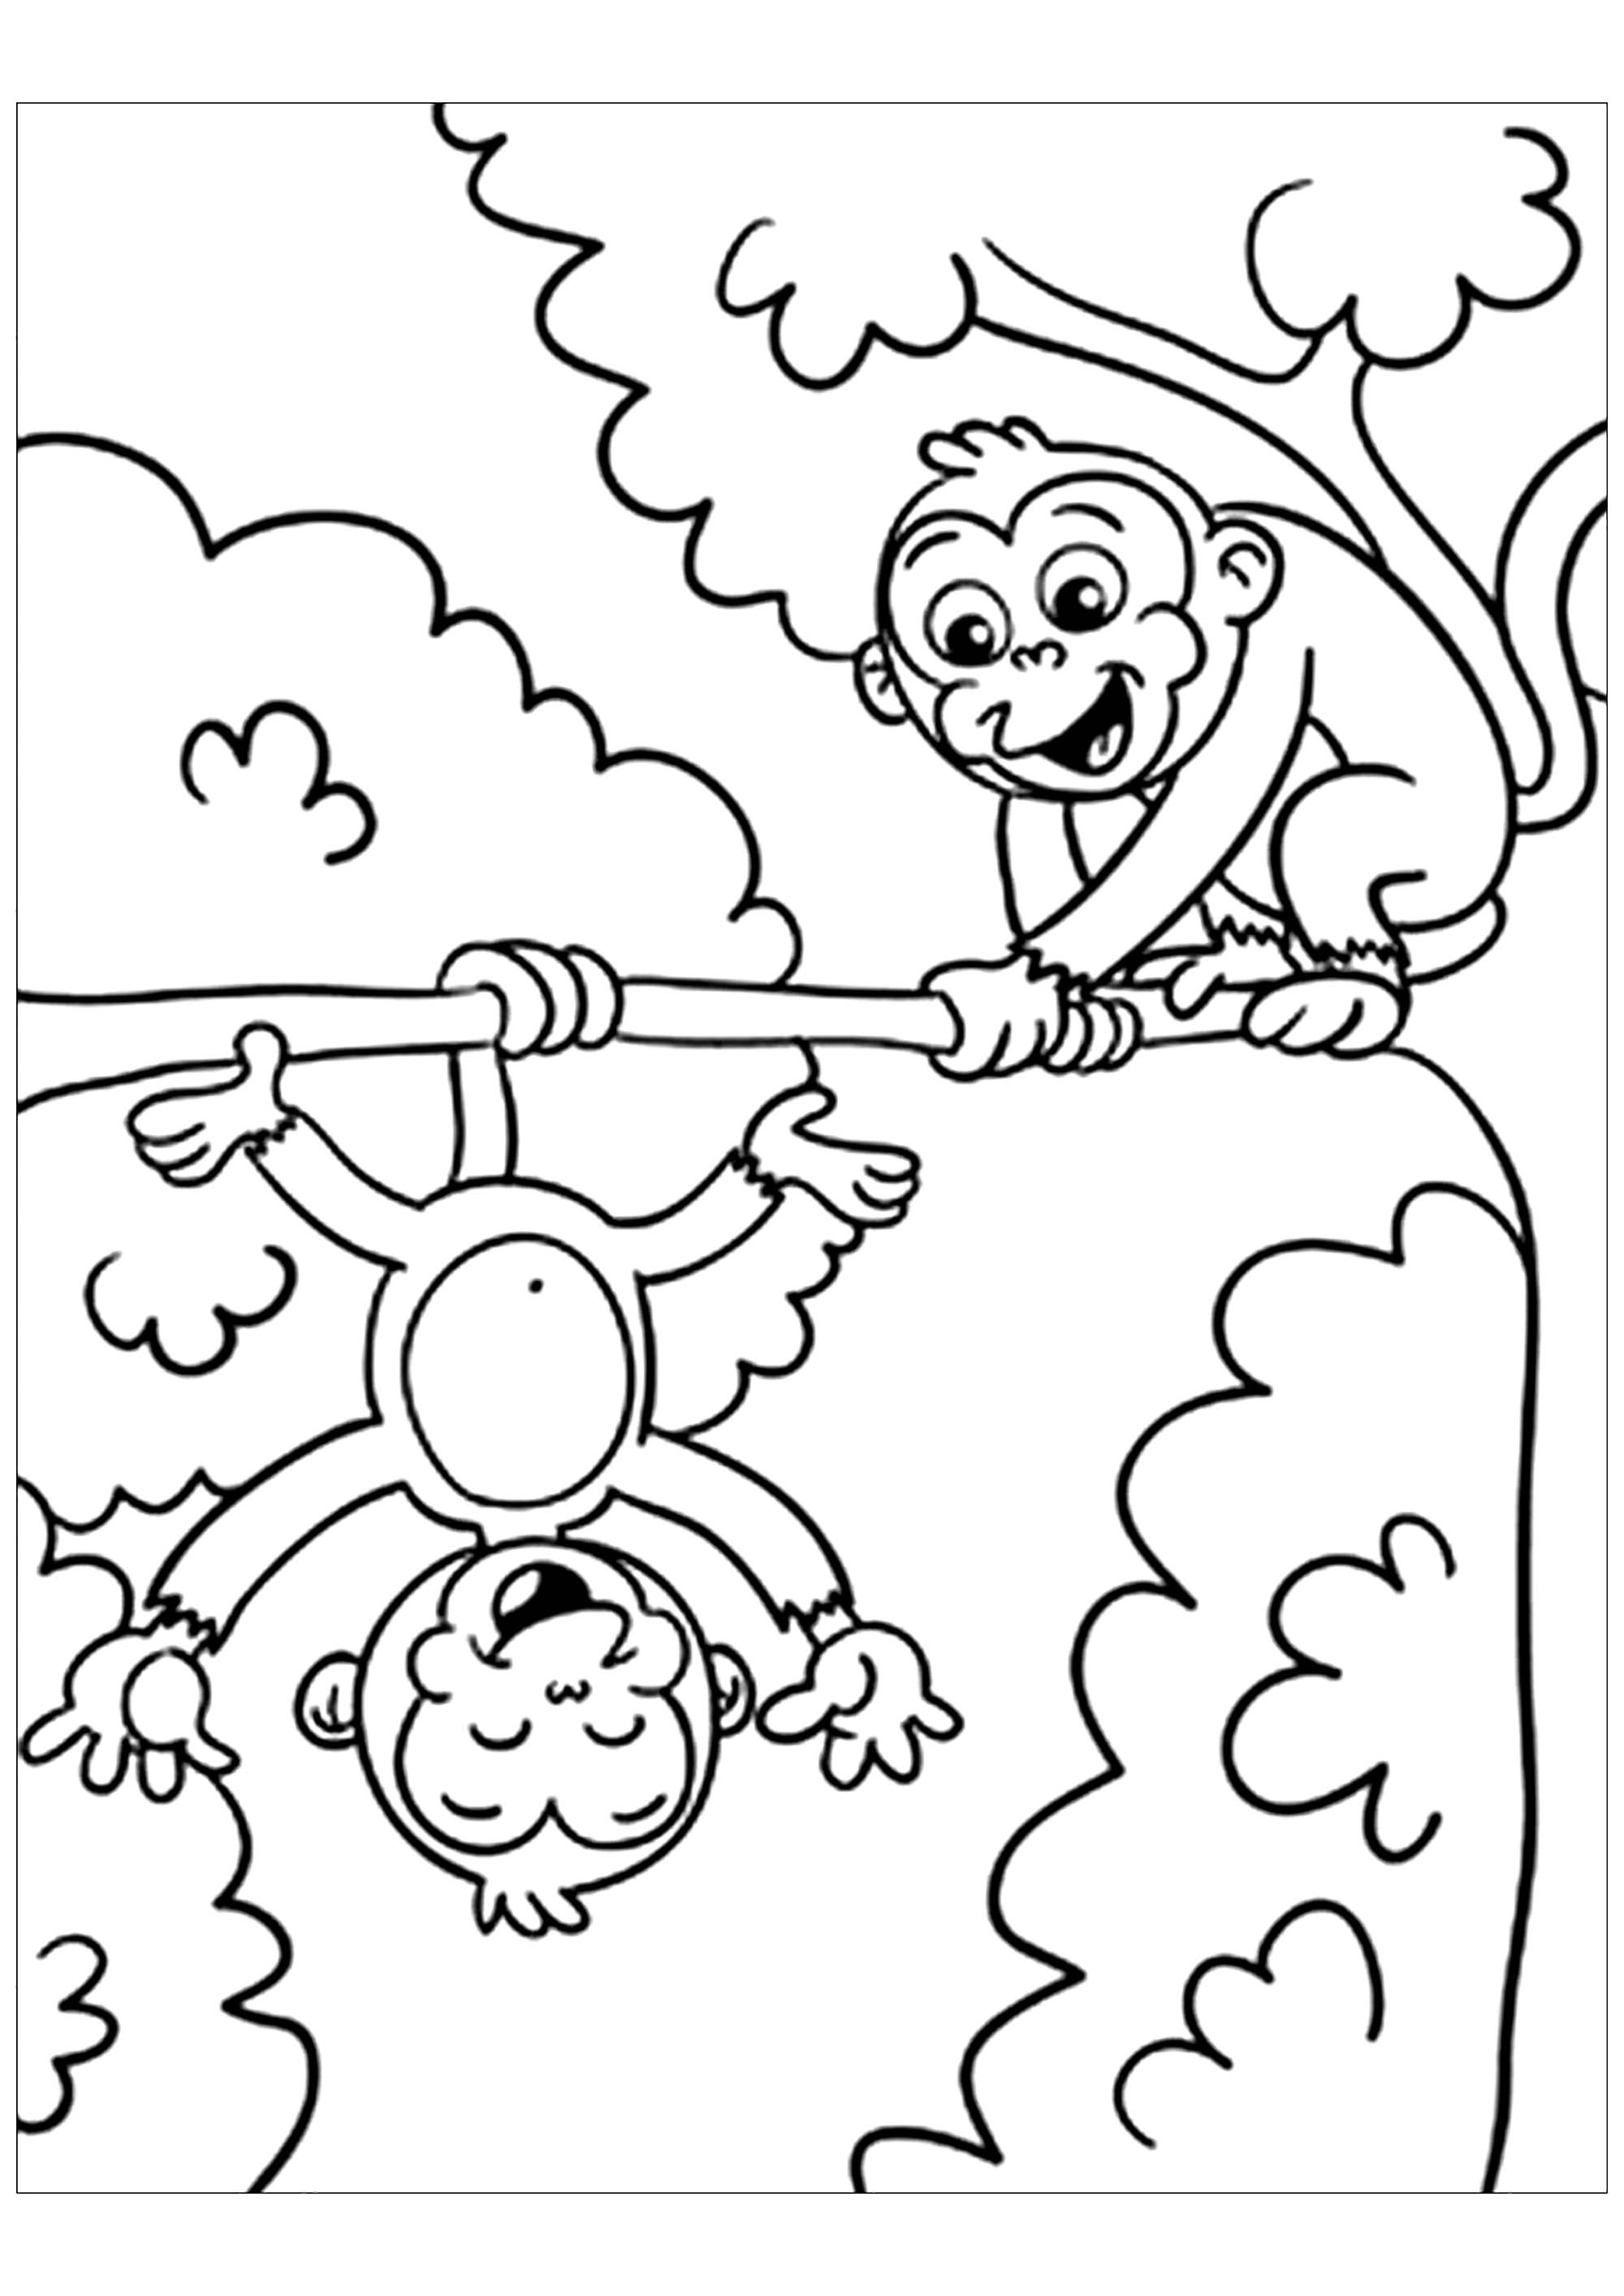 free-monkey-drawing-to-print-and-color-monkeys-kids-coloring-pages